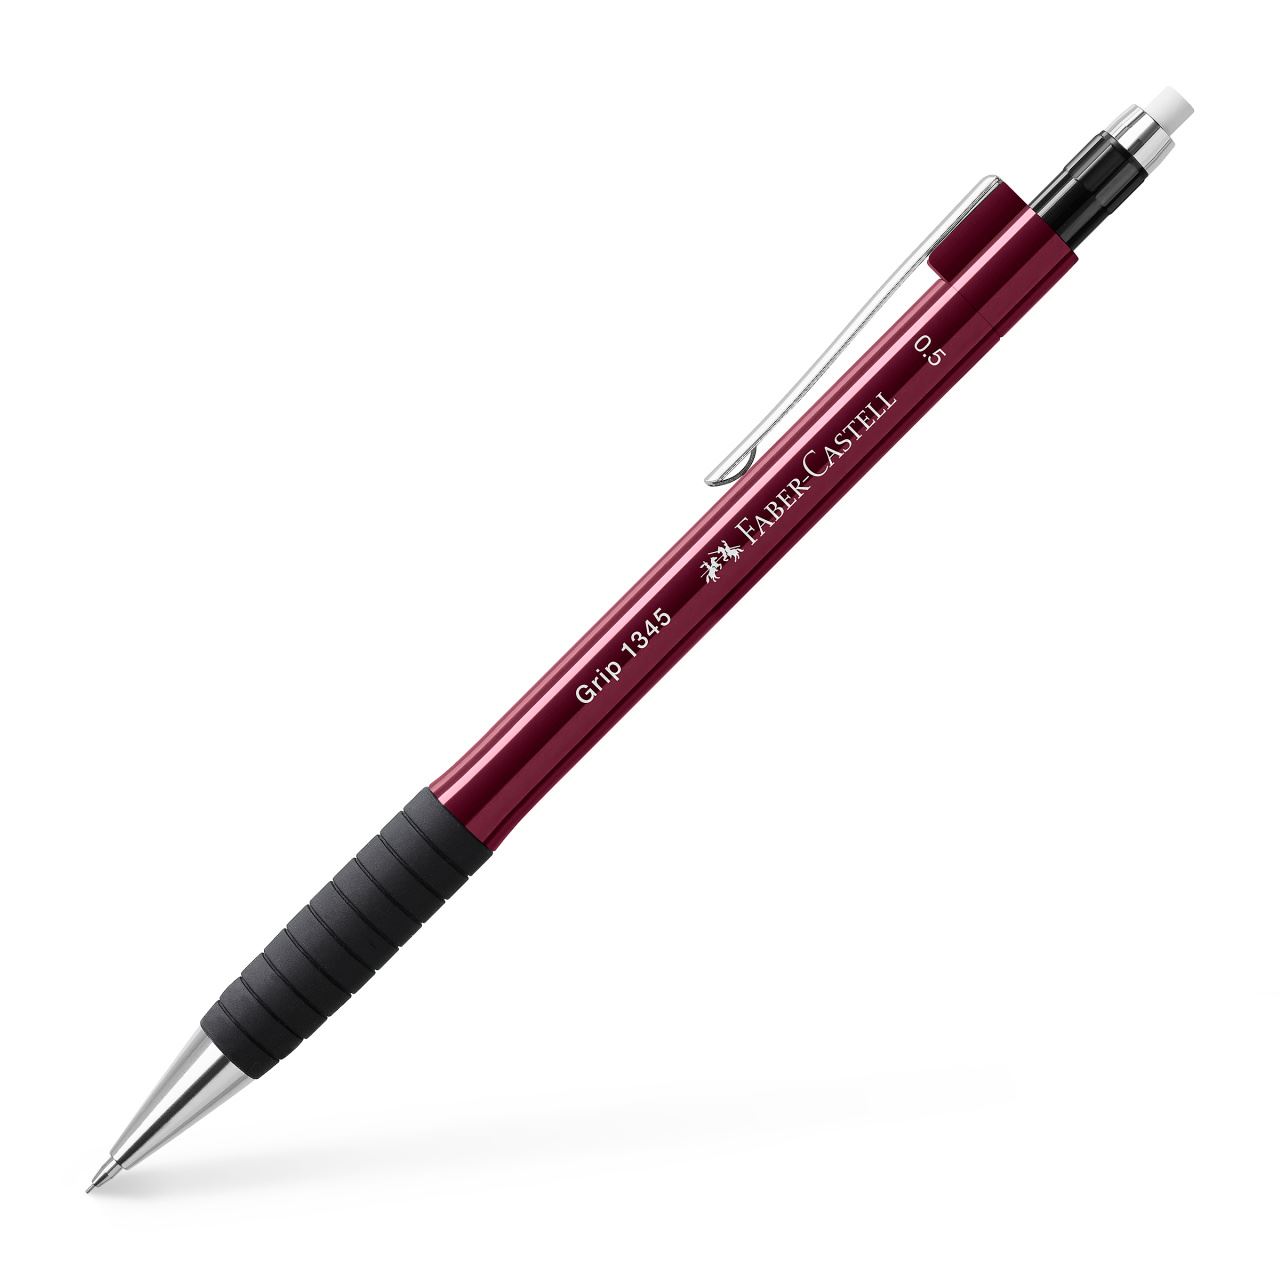 Faber-Castell - Grip 1345 mechanical pencil, 0.5 mm, wine red